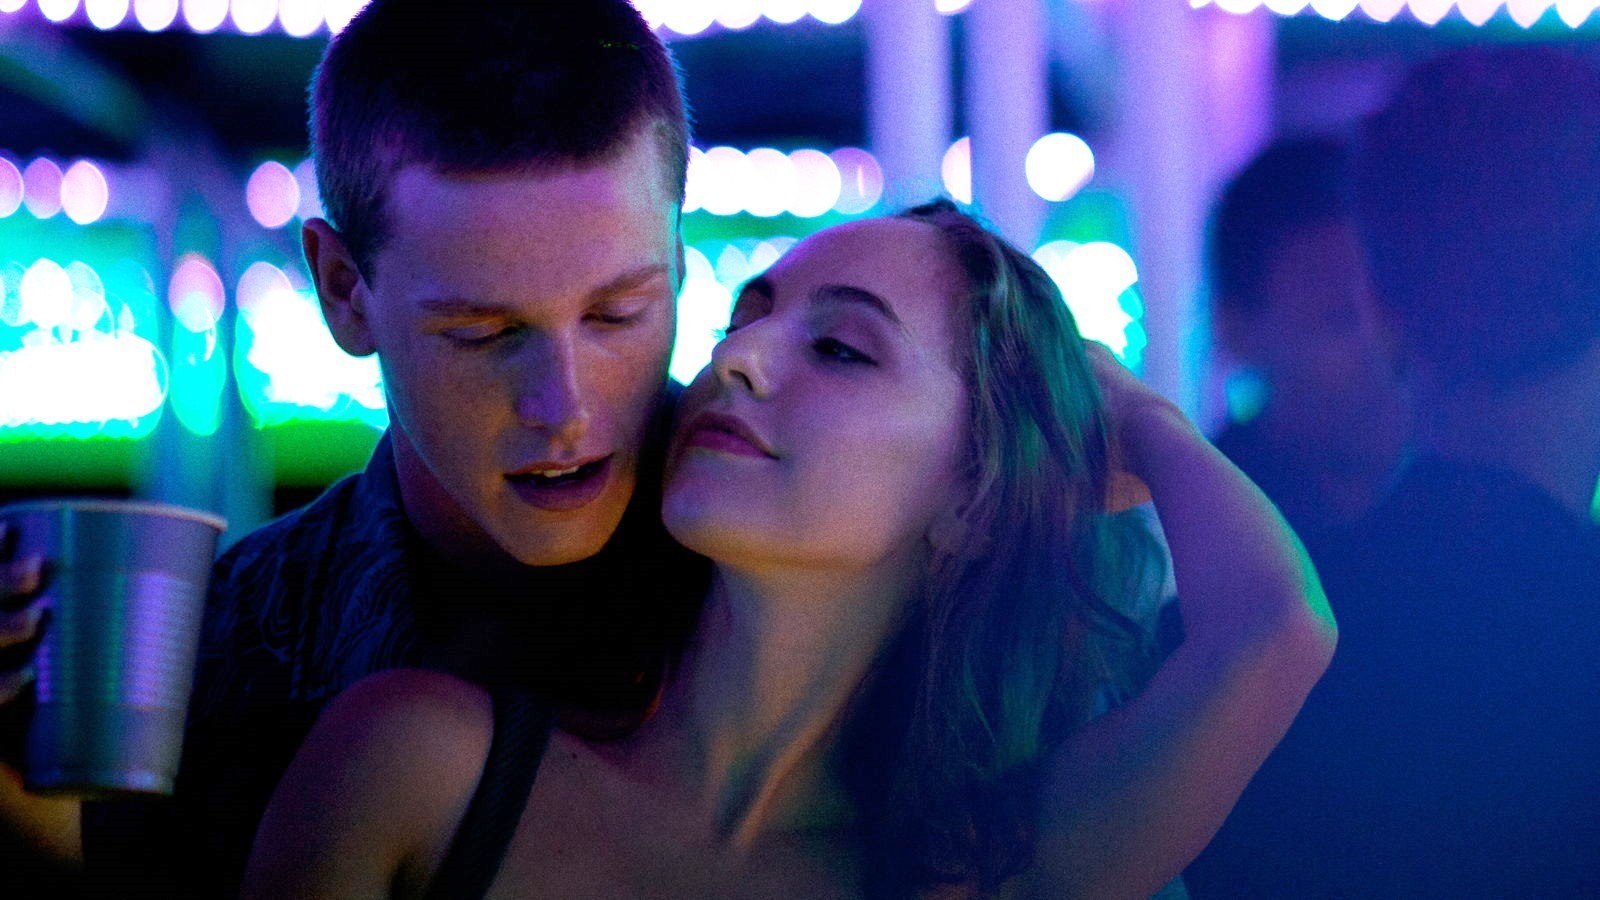 Harris Dickinson stars as Frankie and Madeline Weinstein stars as Simone in Neon's Beach Rats (2017)